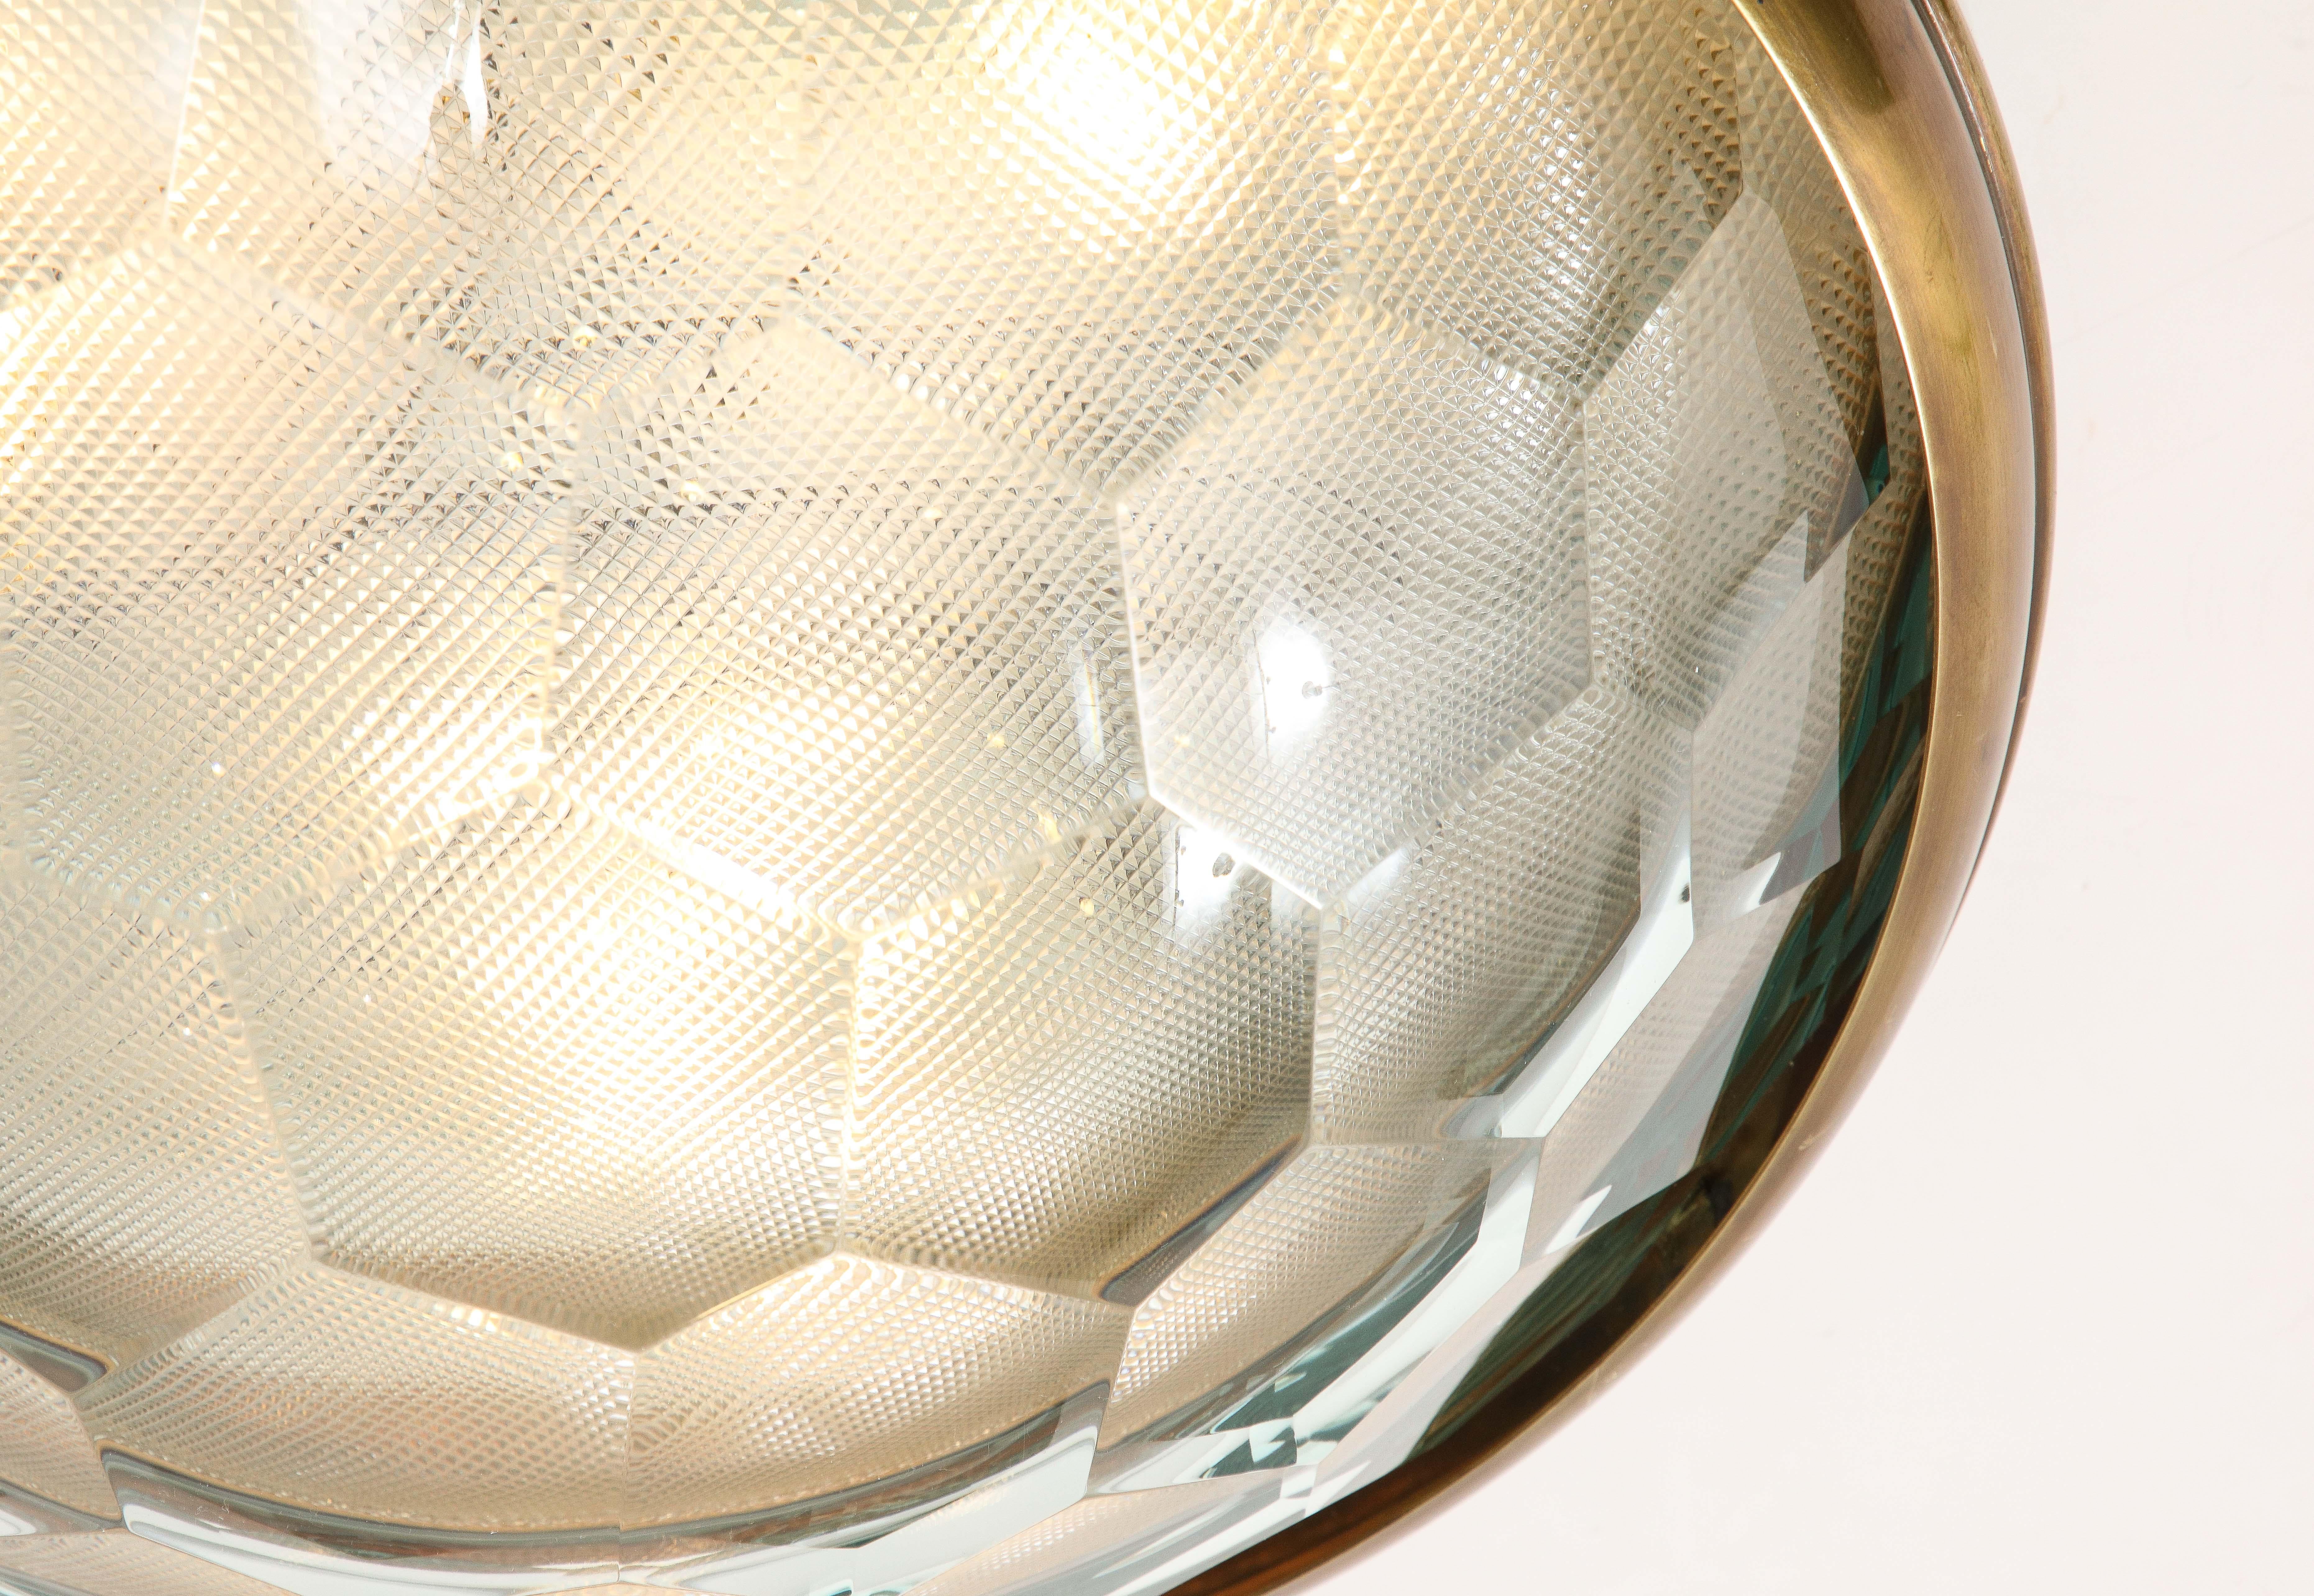 Large Faceted Glass Flush Mount Ceiling Light in Style of Fontana Arte, 1960s In Good Condition For Sale In New York, NY